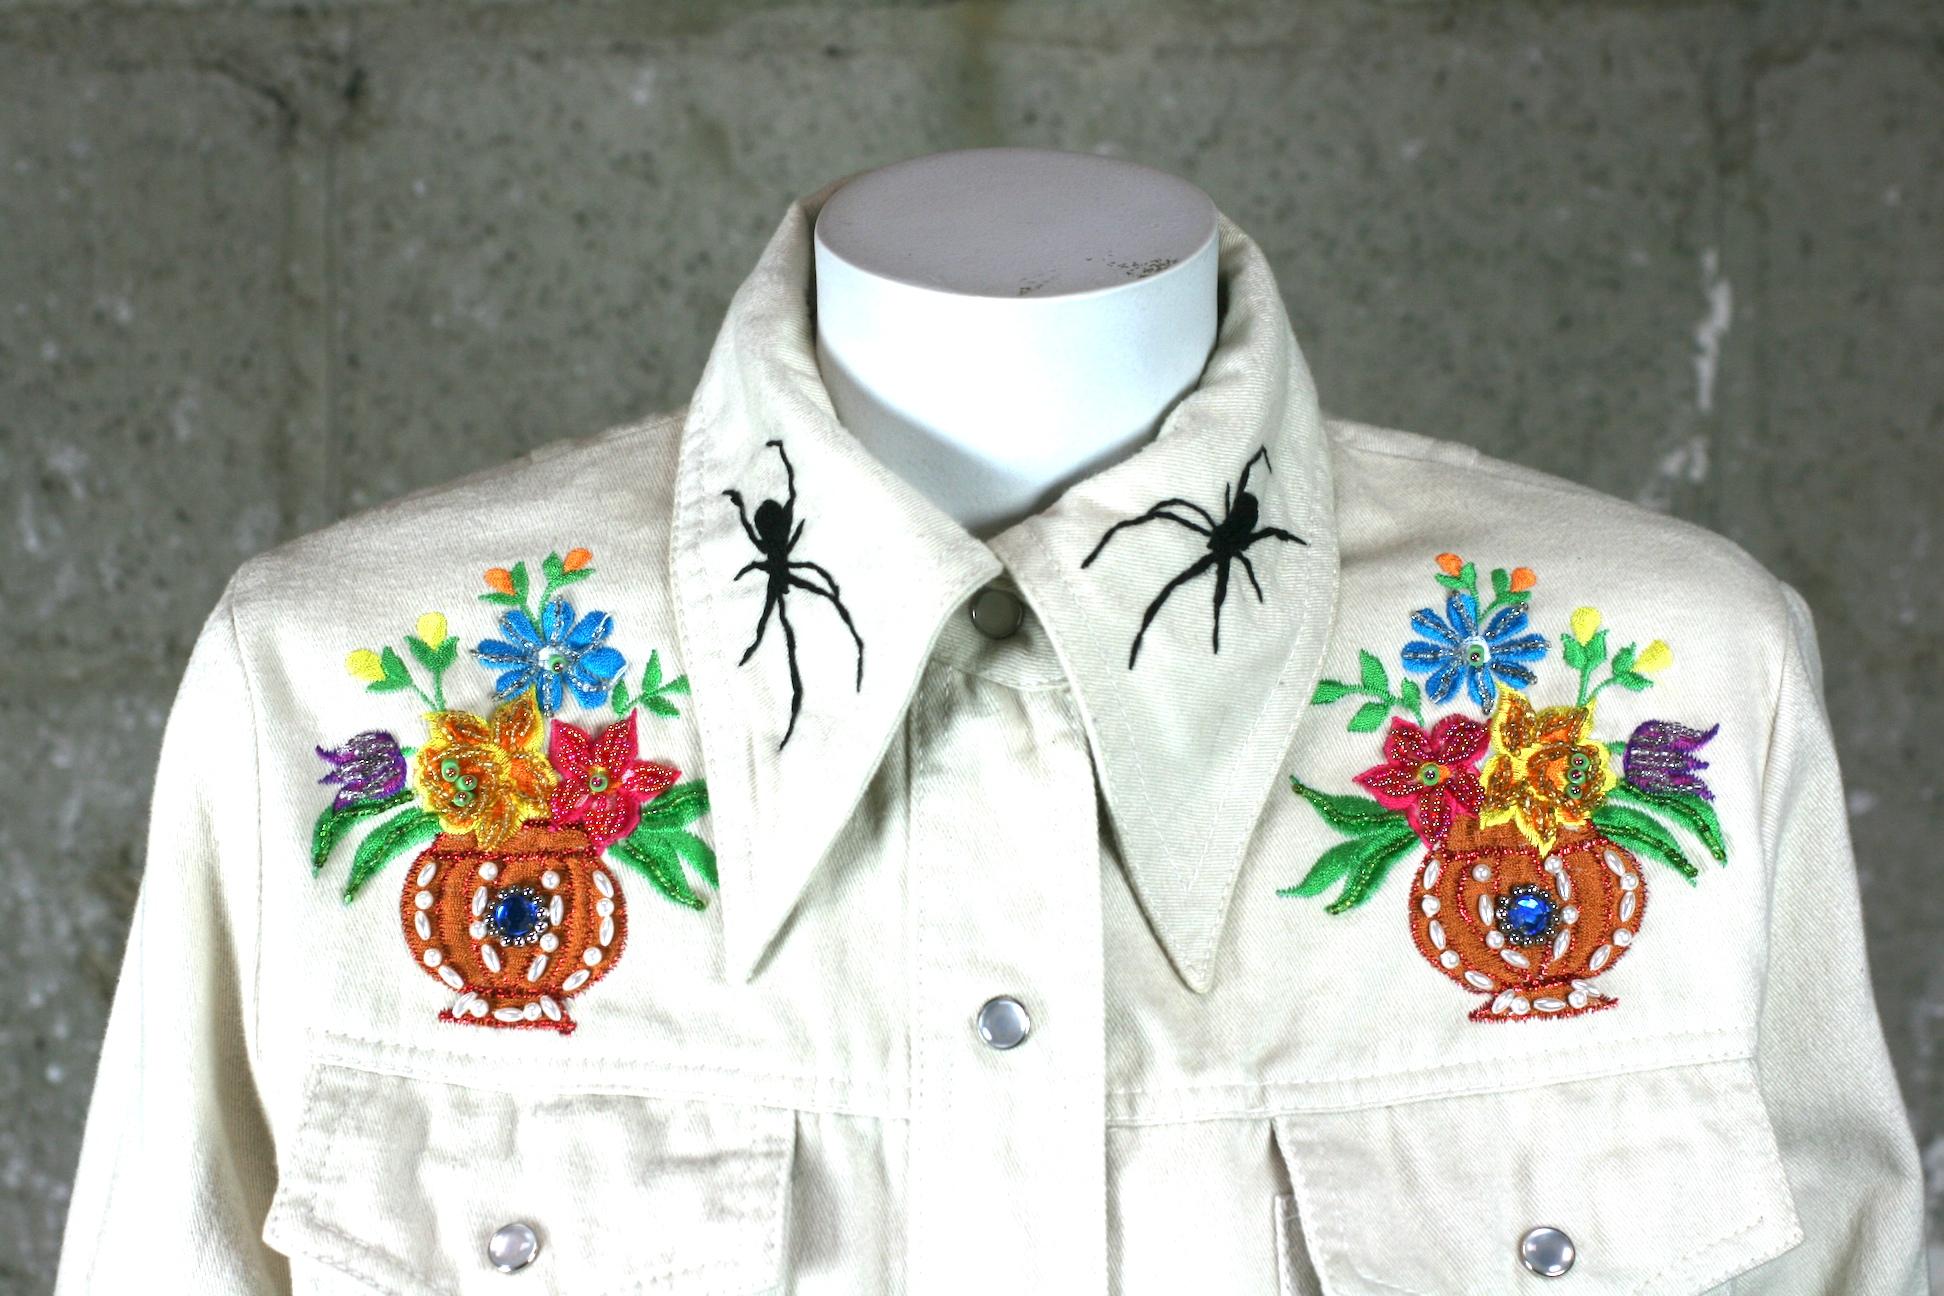 Black Widow Embroidered Cotton Shirt, Upcycled by Studio VL In Excellent Condition For Sale In New York, NY